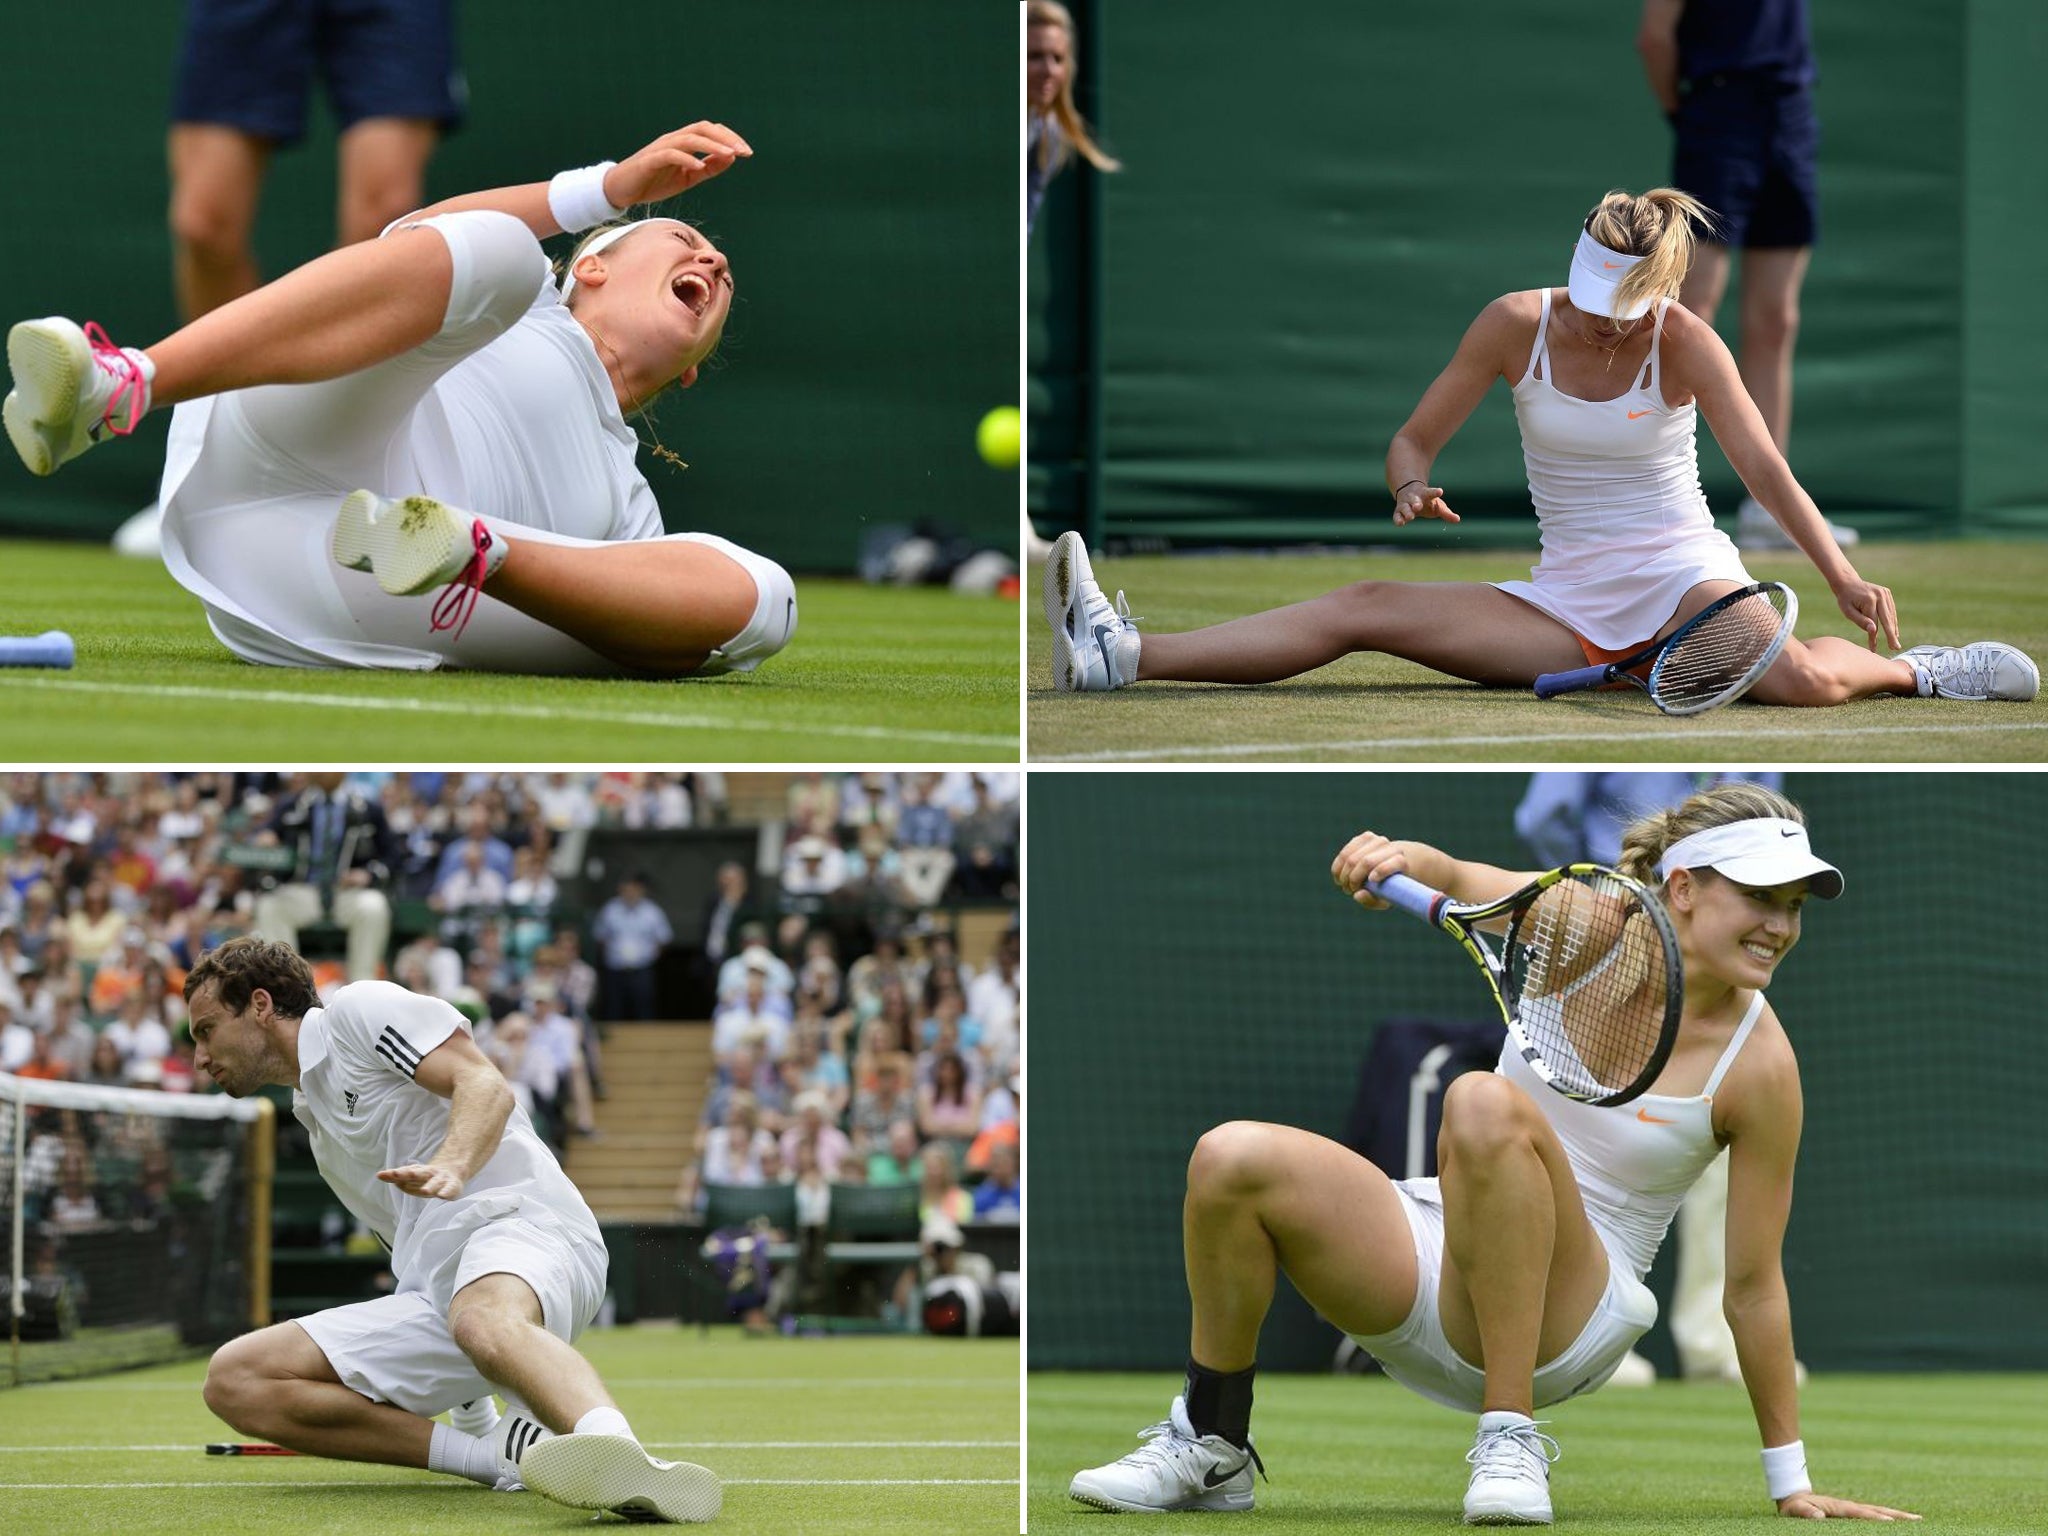 Maria Sharapova continually struggled to keep her footing and complained to an umpire that the court was ‘dangerous’ as she exited the tournament